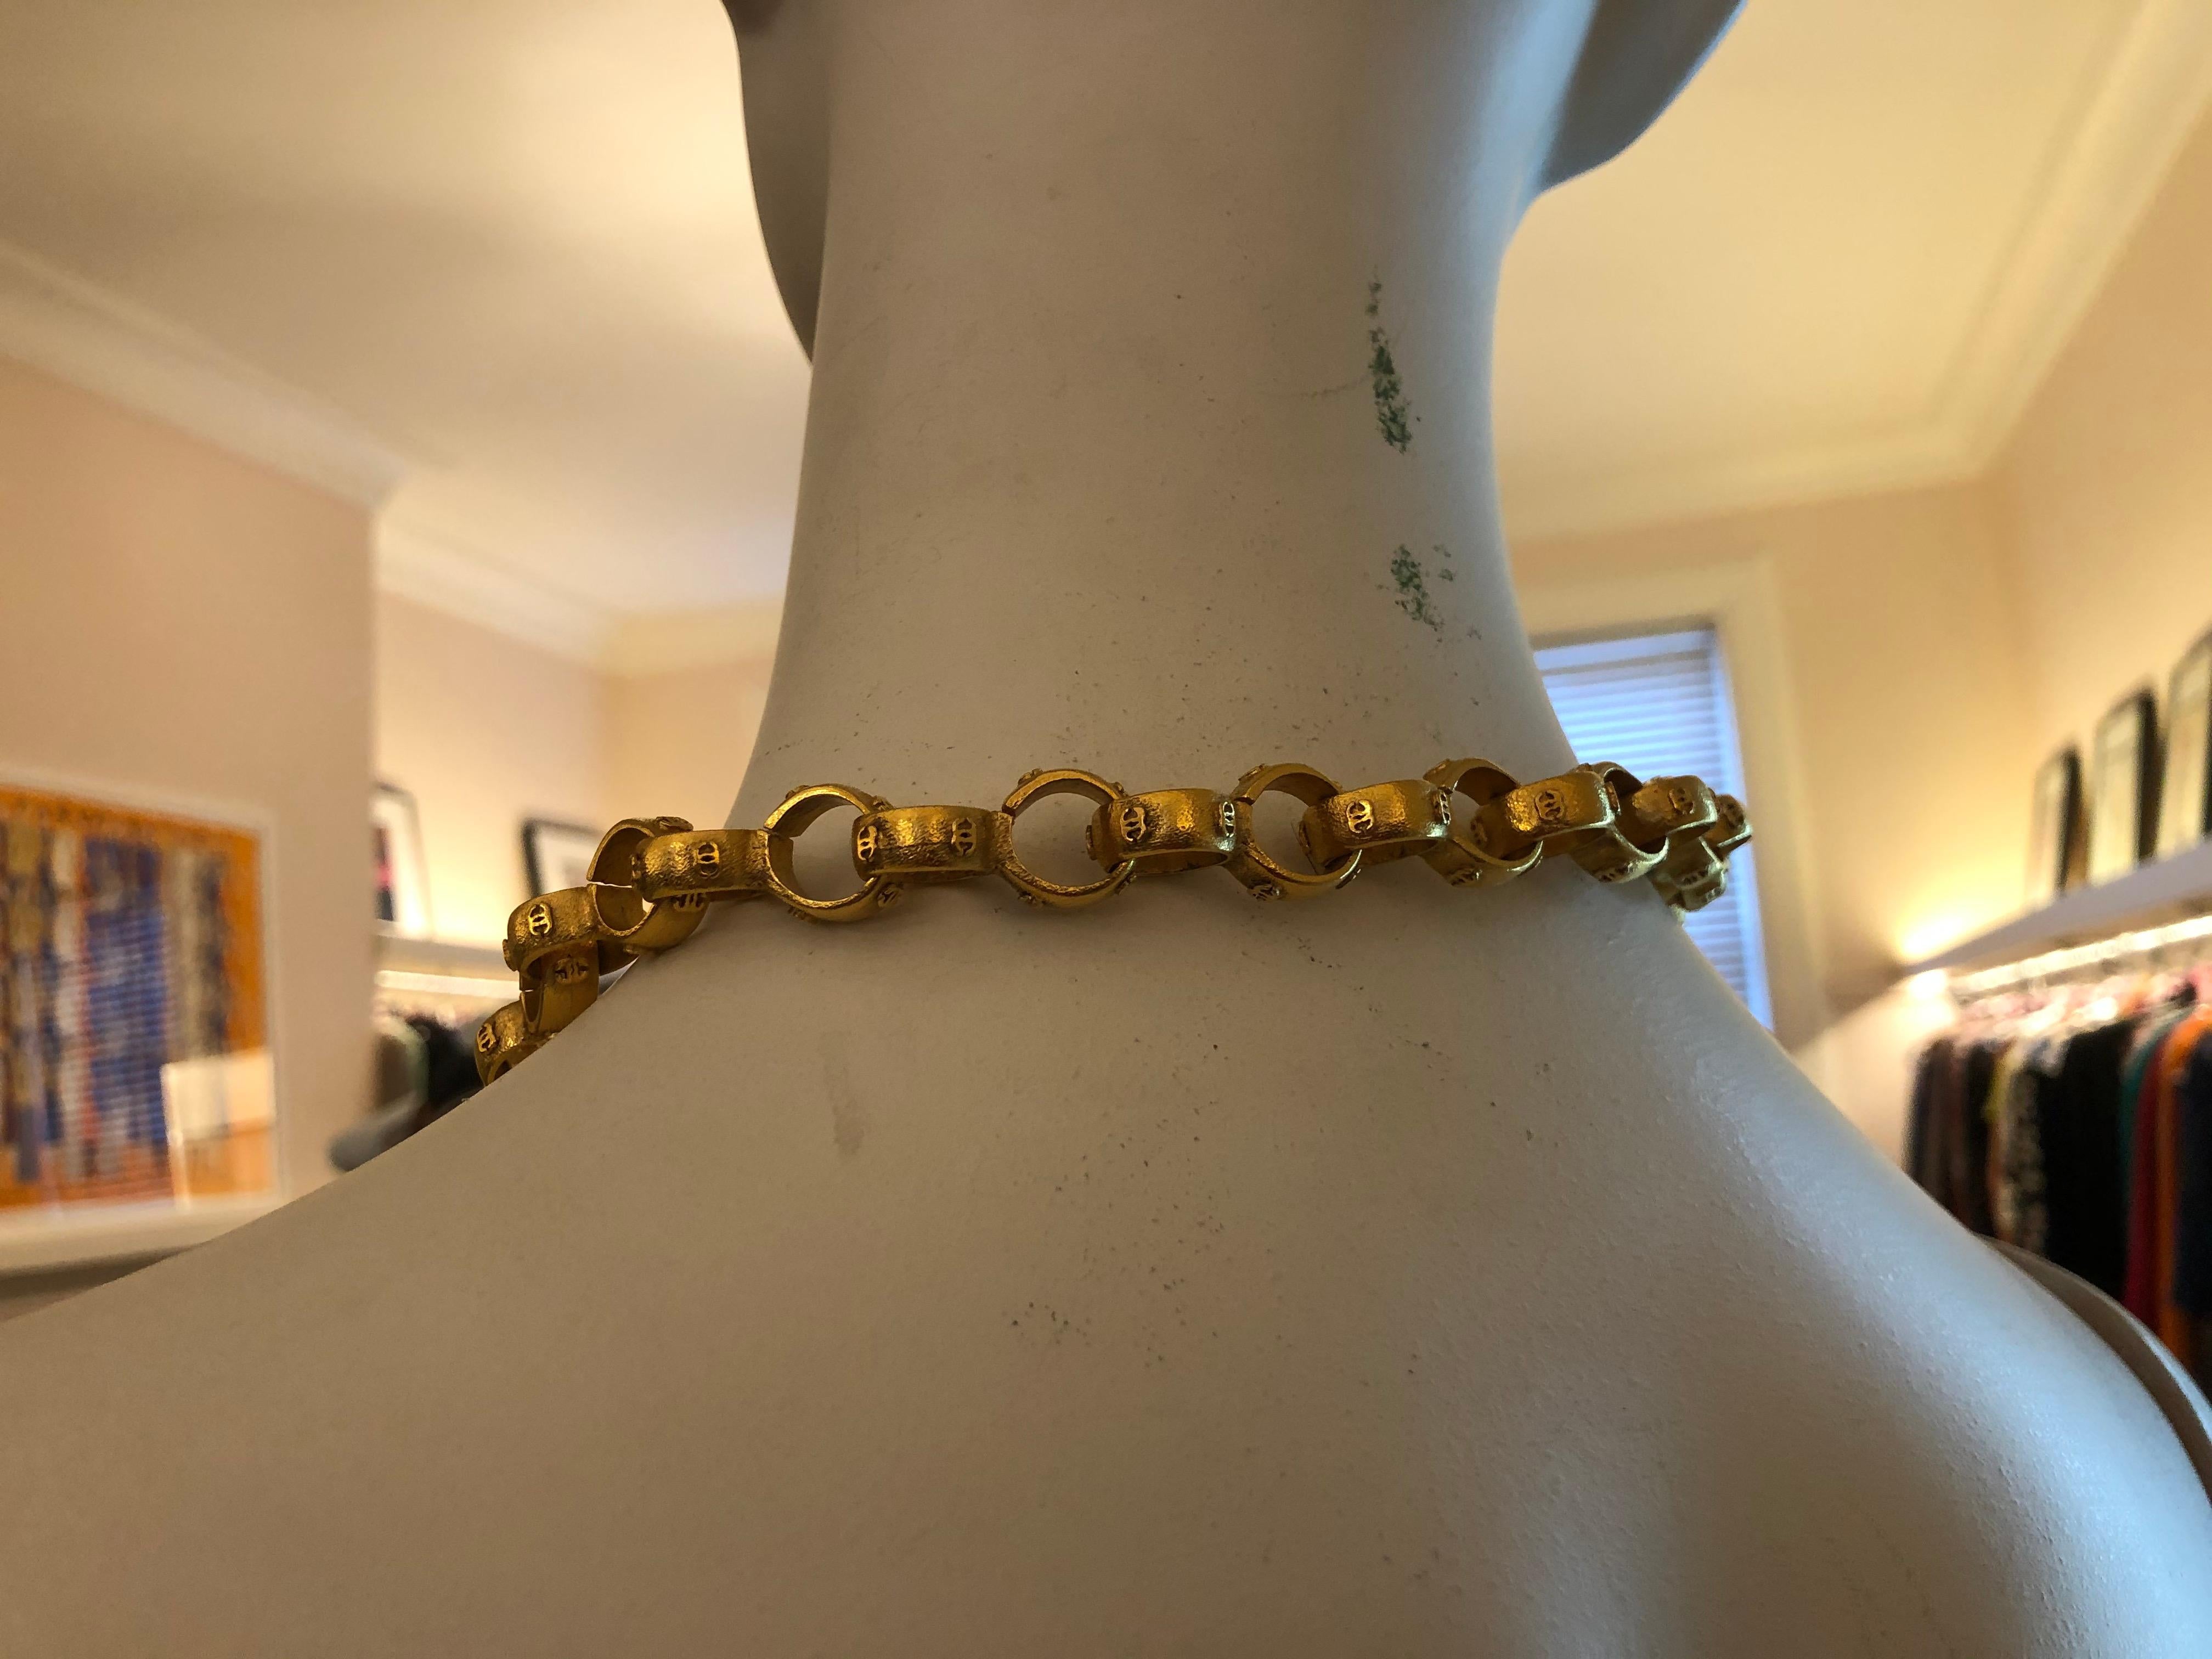 Substantial Chanel necklace from the 1984-90 period. The chain is made of rings with the CC emblem and the oval disc describes the era of the piece as well as the Chanel name with the copyright mark and made in France. The necklace comes with a